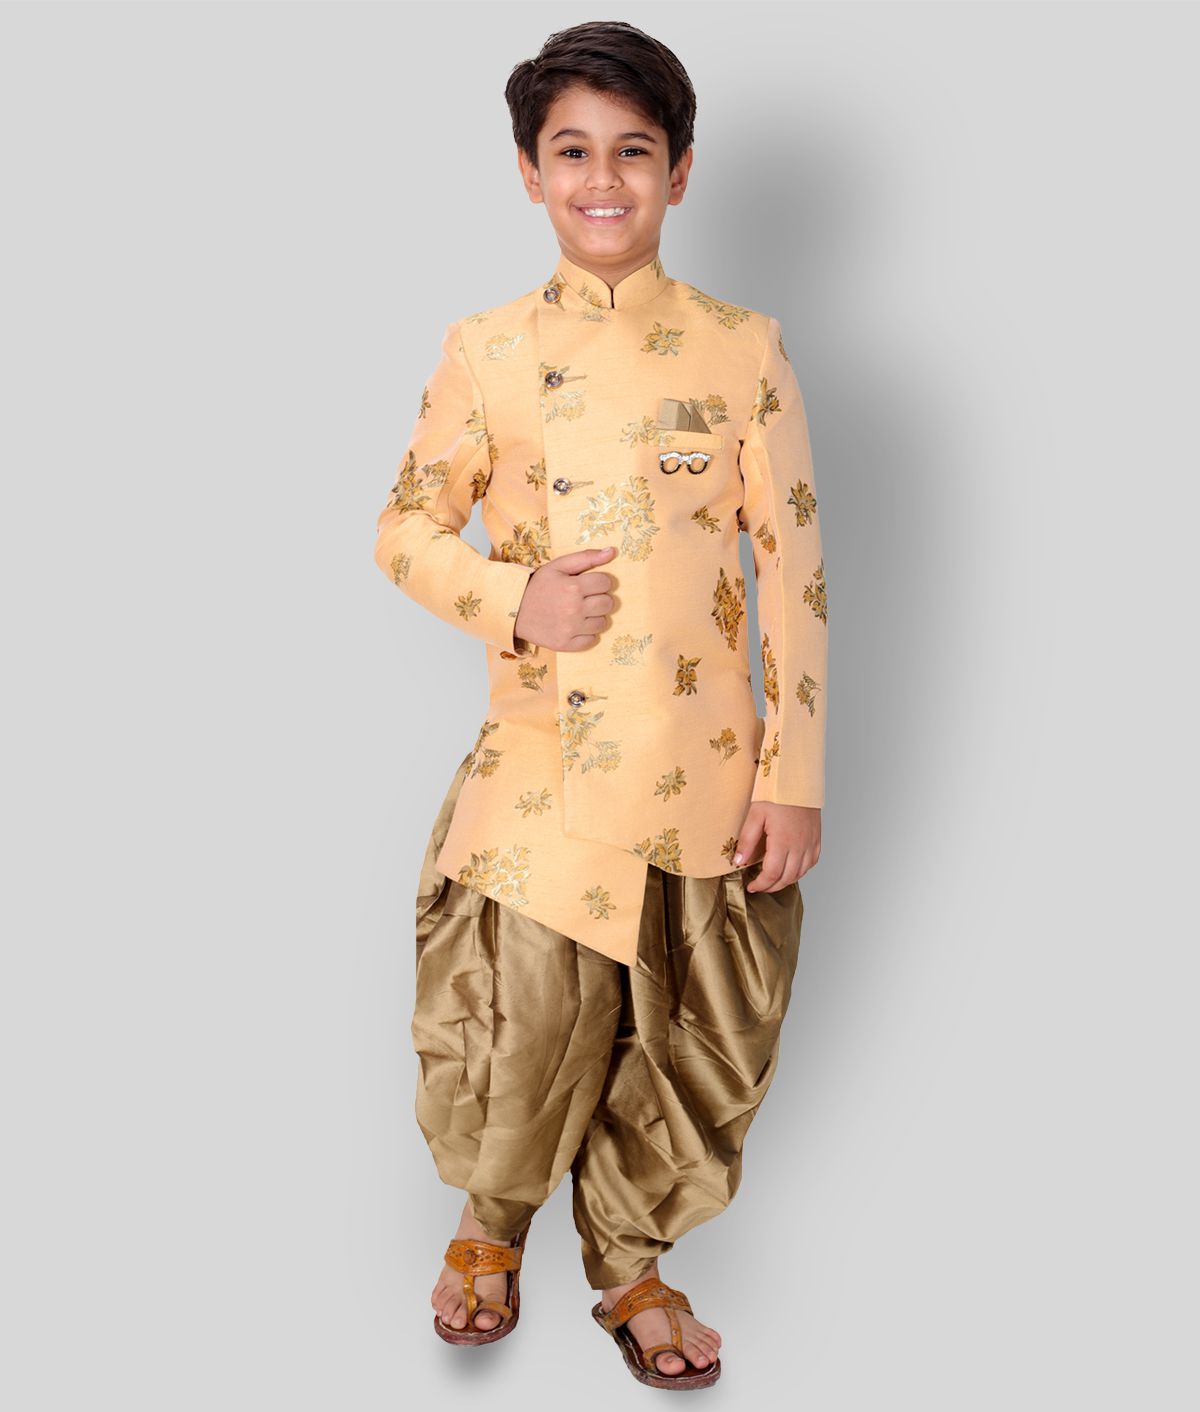     			Fourfolds Ethnic Wear Indo Western and Dhoti set for Kids and Boys_FE604